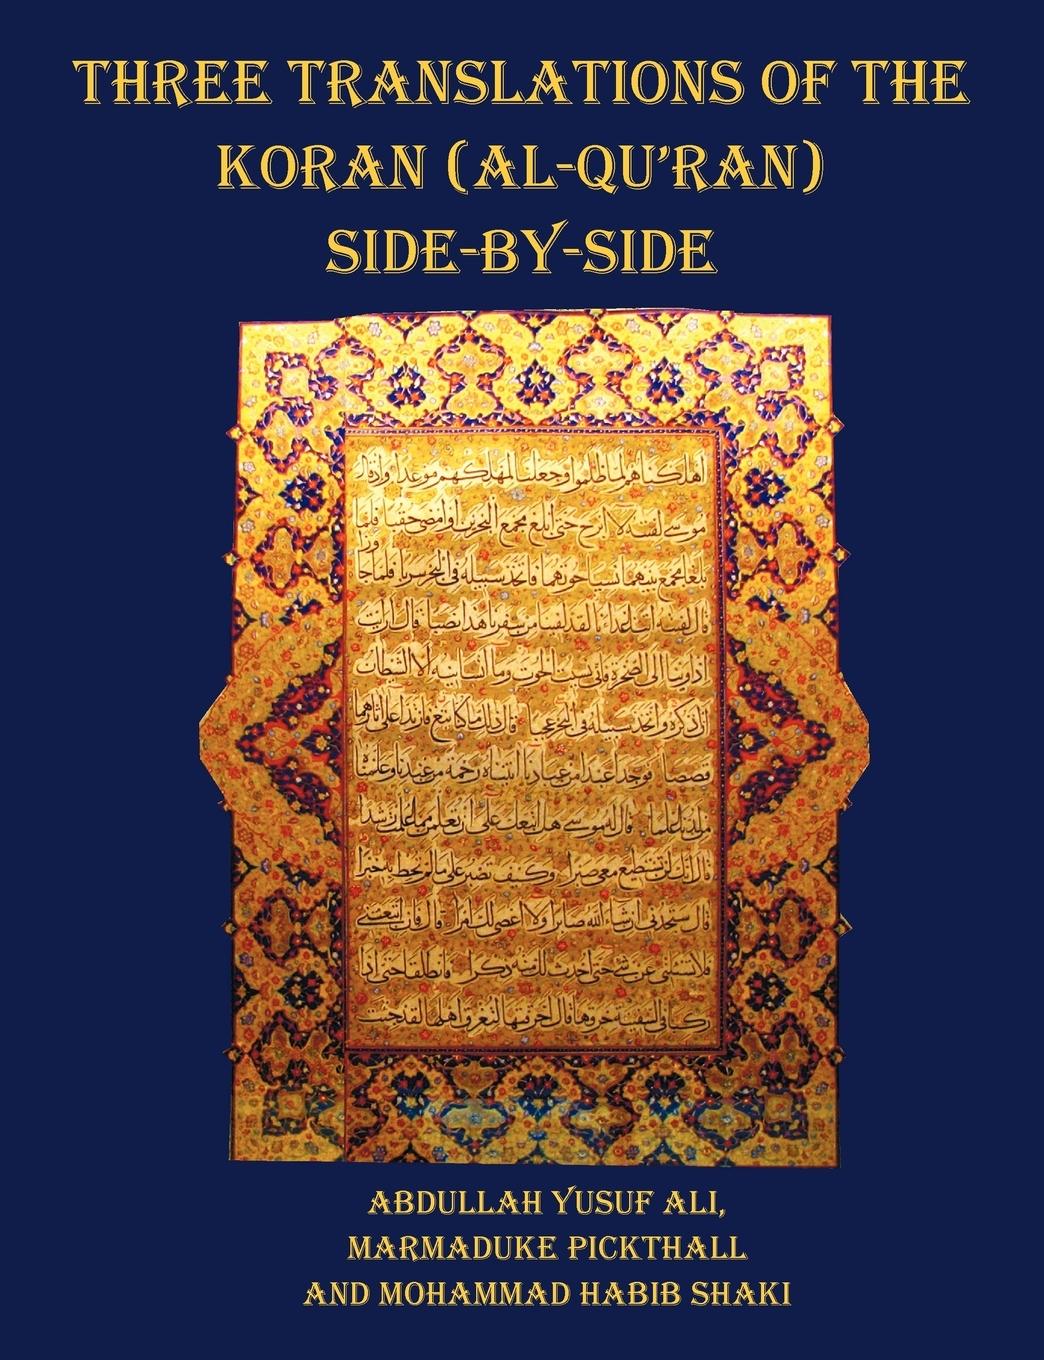 Three Translations of The Koran (Al-Qur an) side by side - 11 pt print with each verse not split across pages